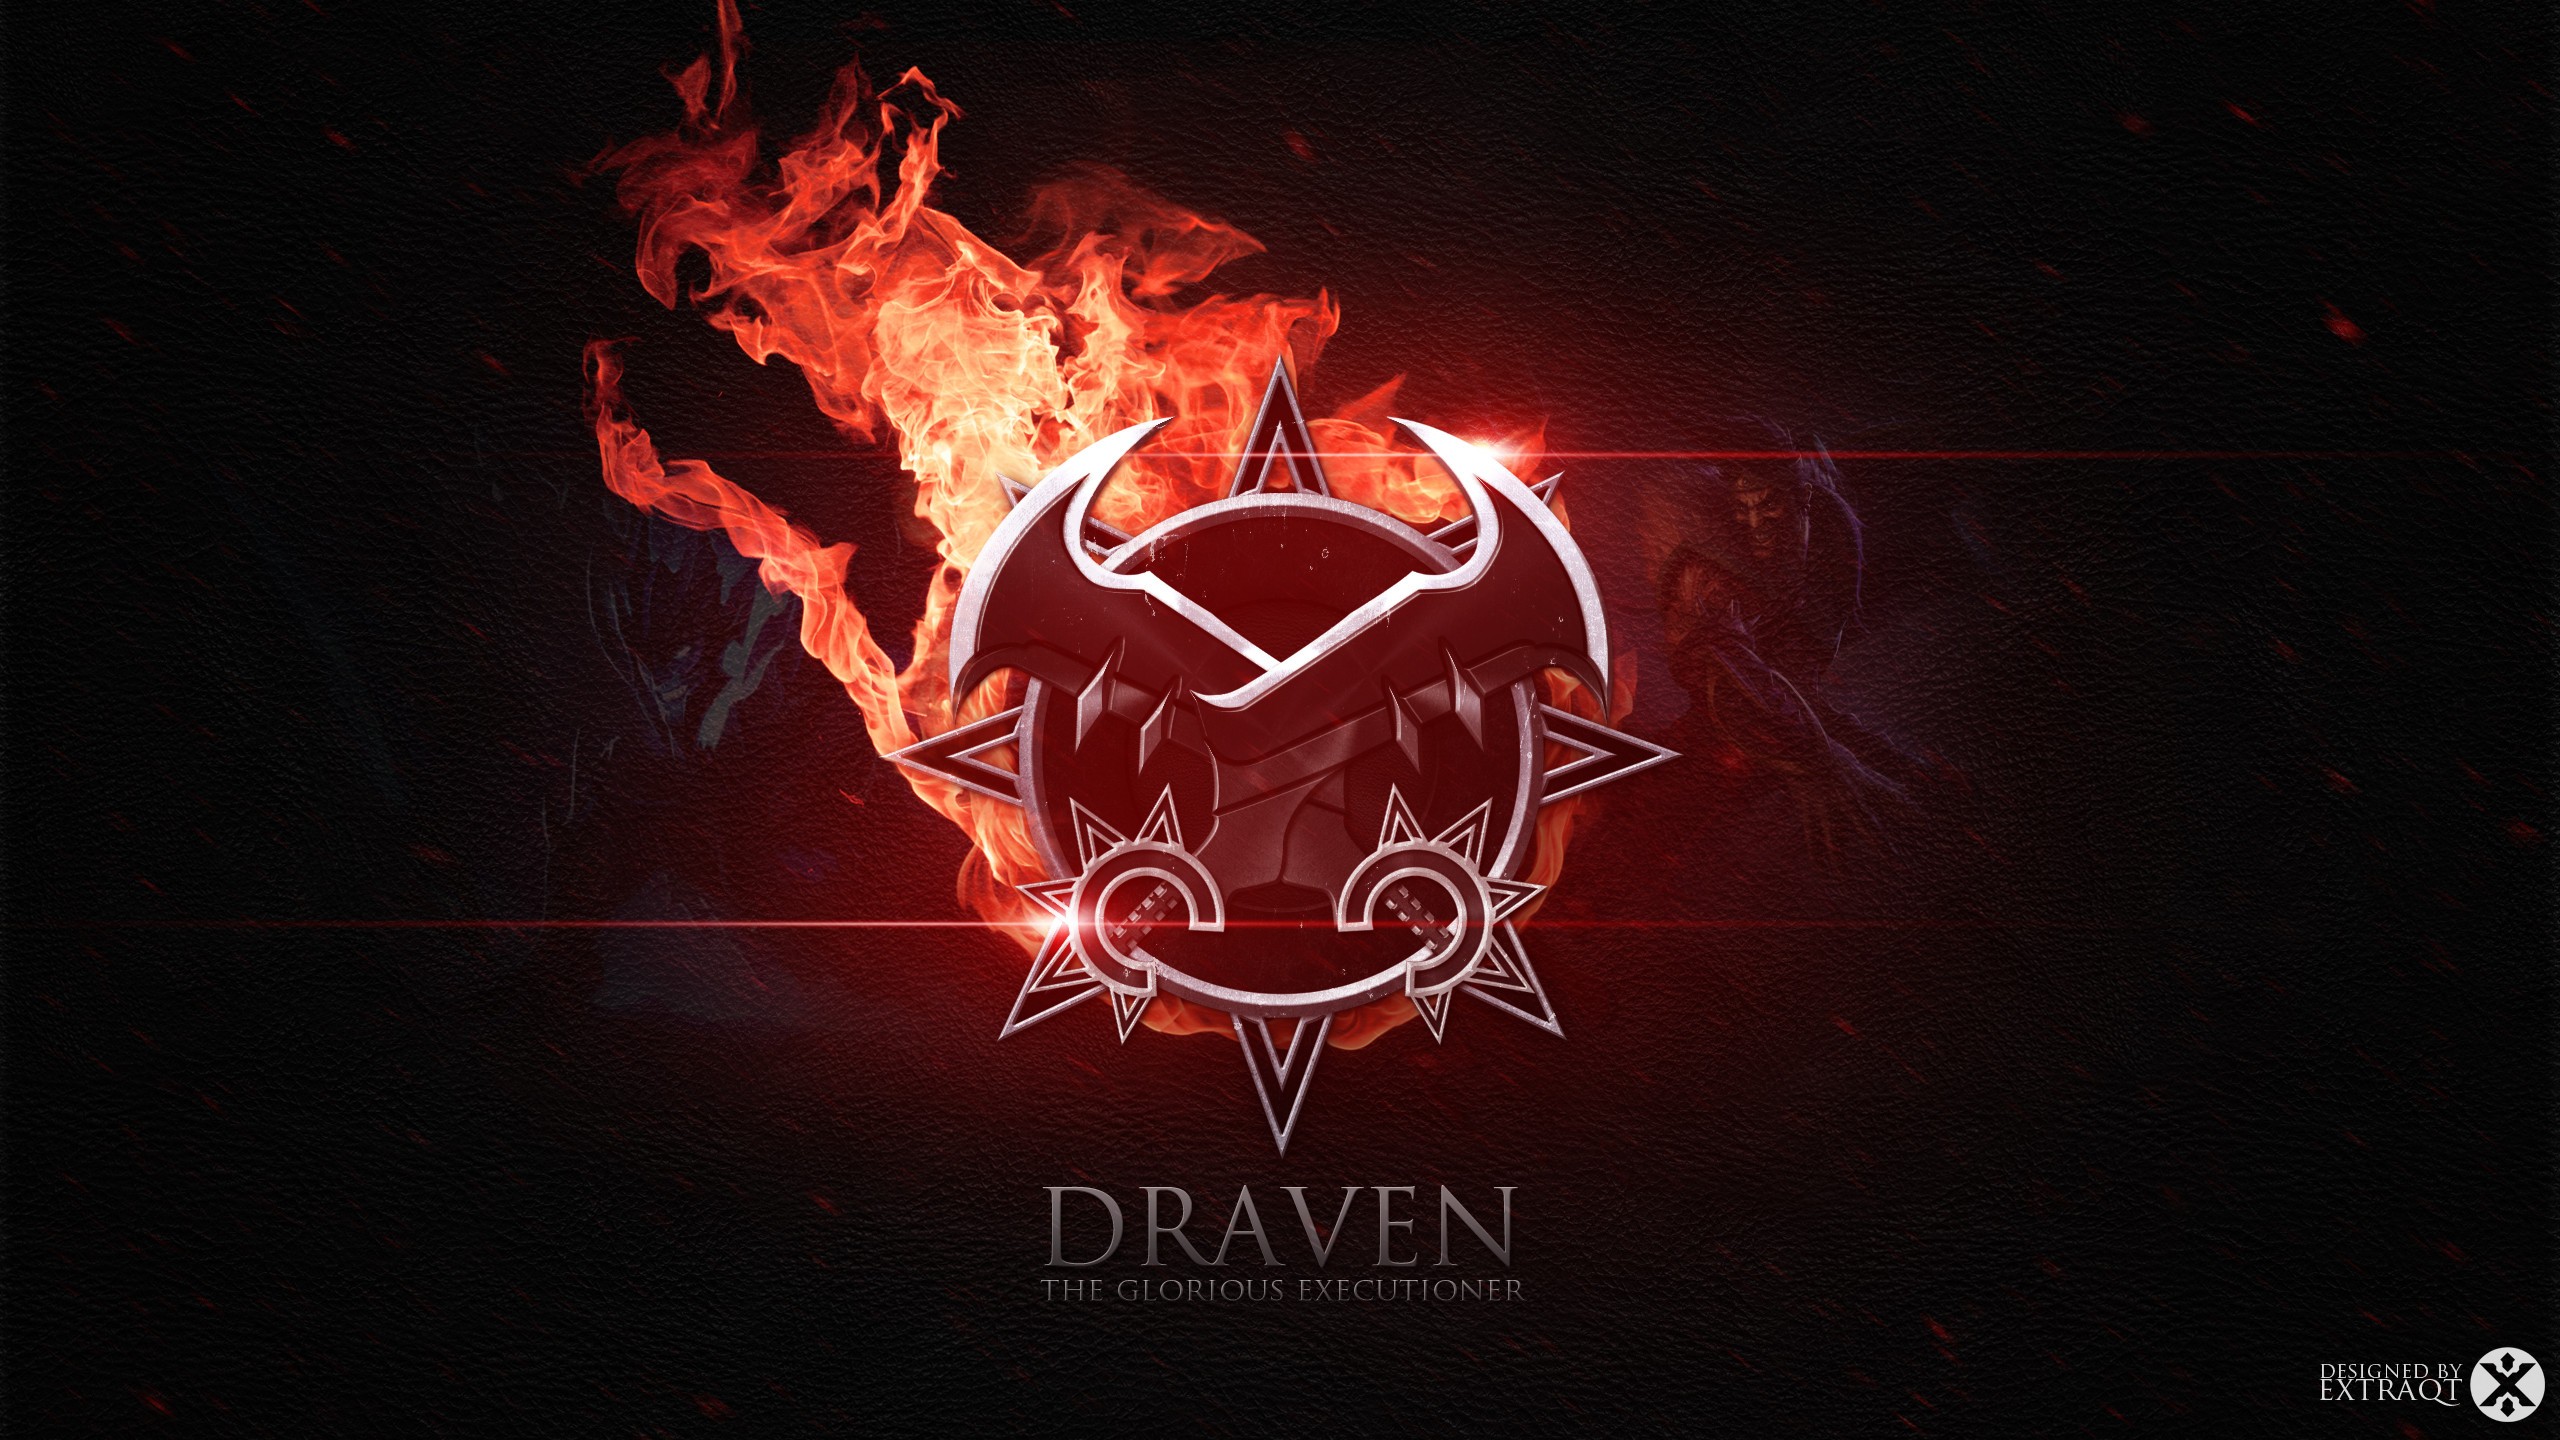 General 2560x1440 Draven (League of Legends) League of Legends Riot Games PC gaming low light watermarked digital art